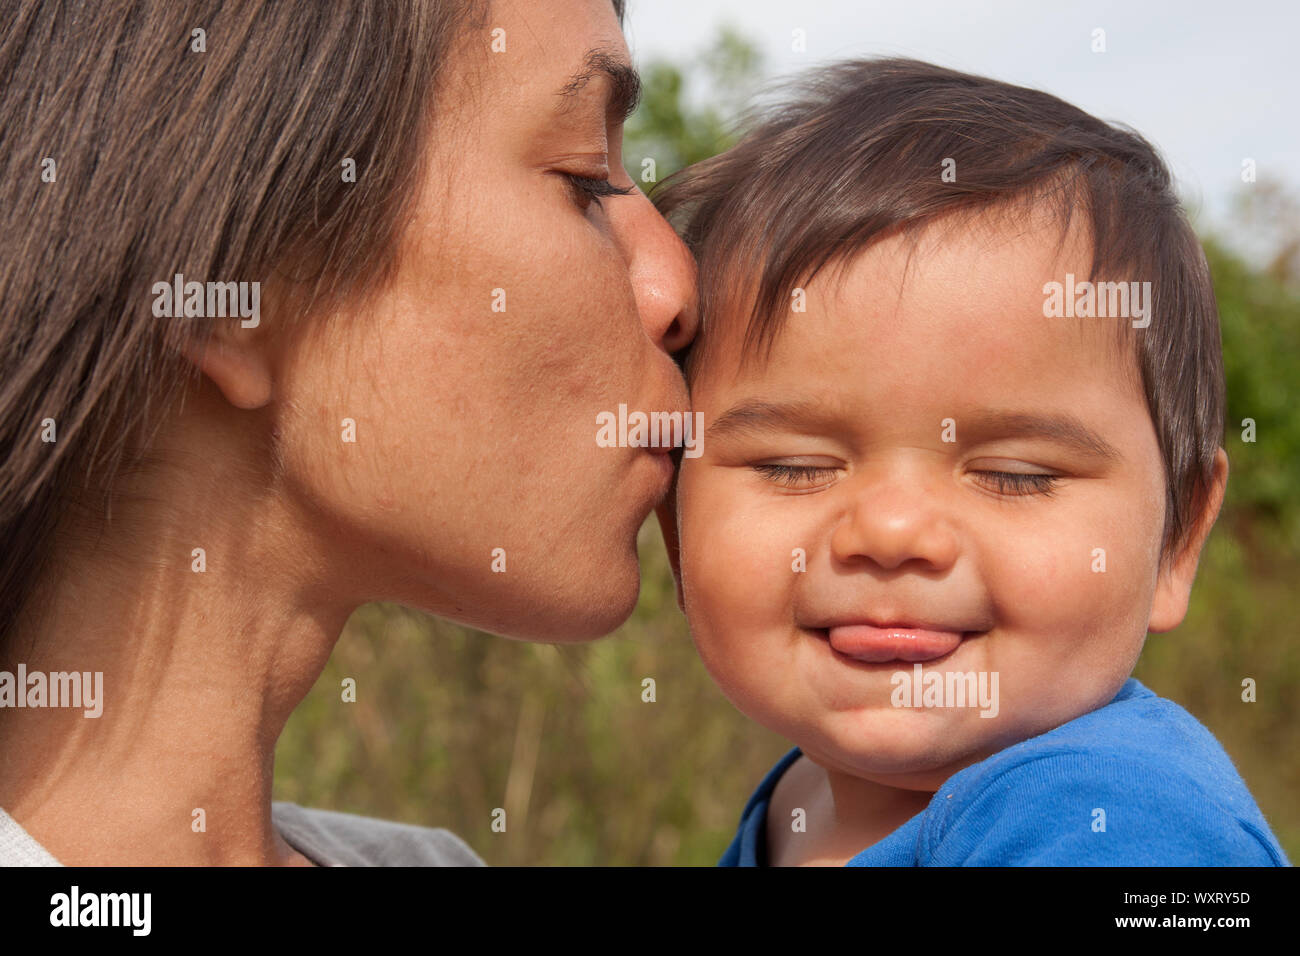 mother kissing baby on cheek Stock Photo